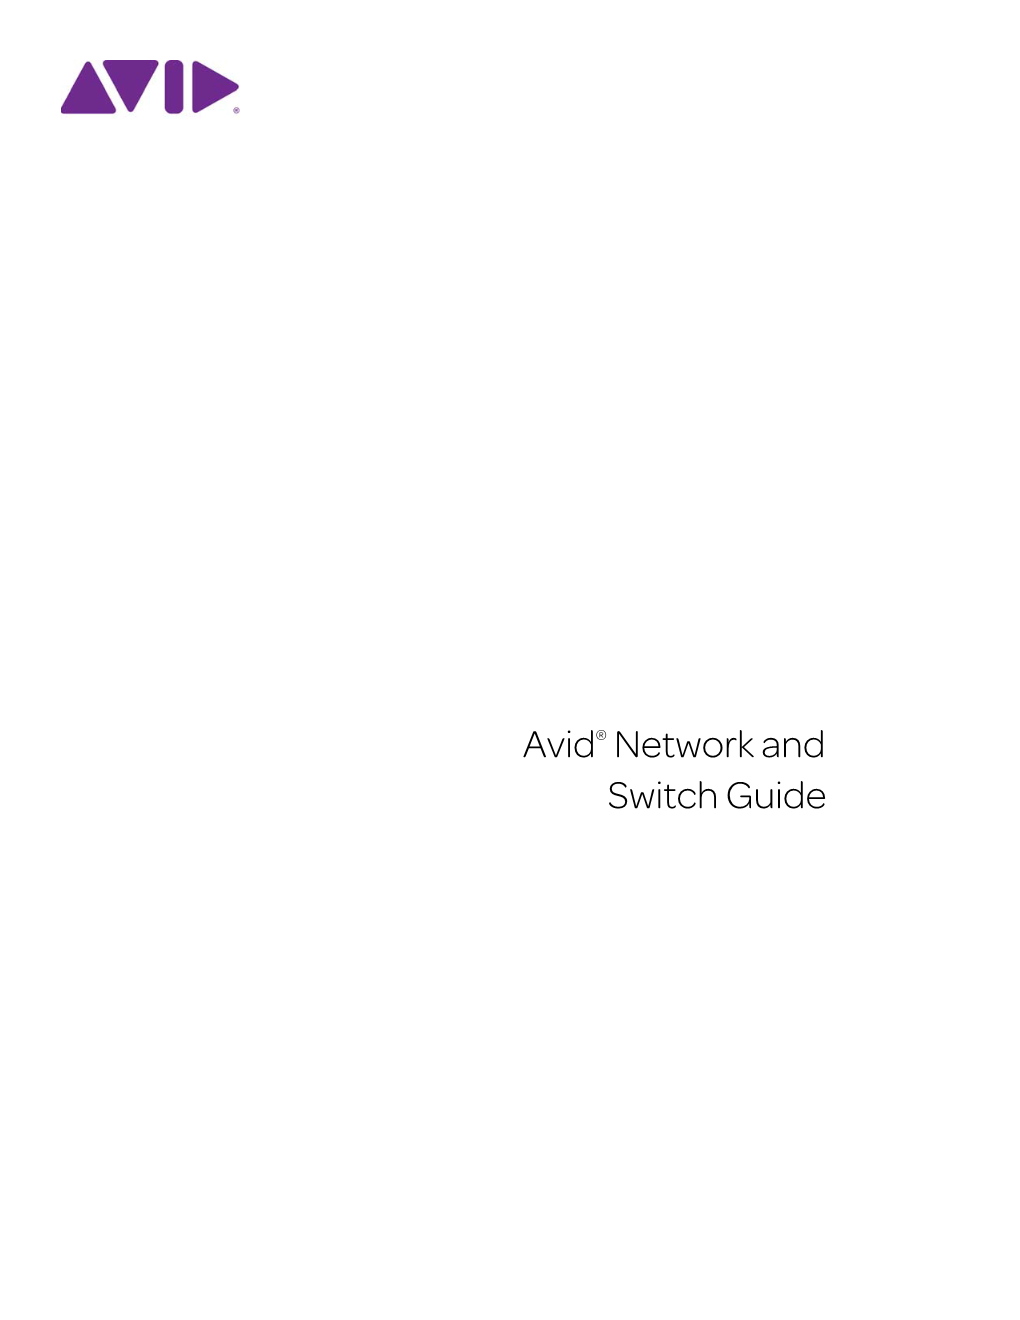 Avid® Network and Switch Guide